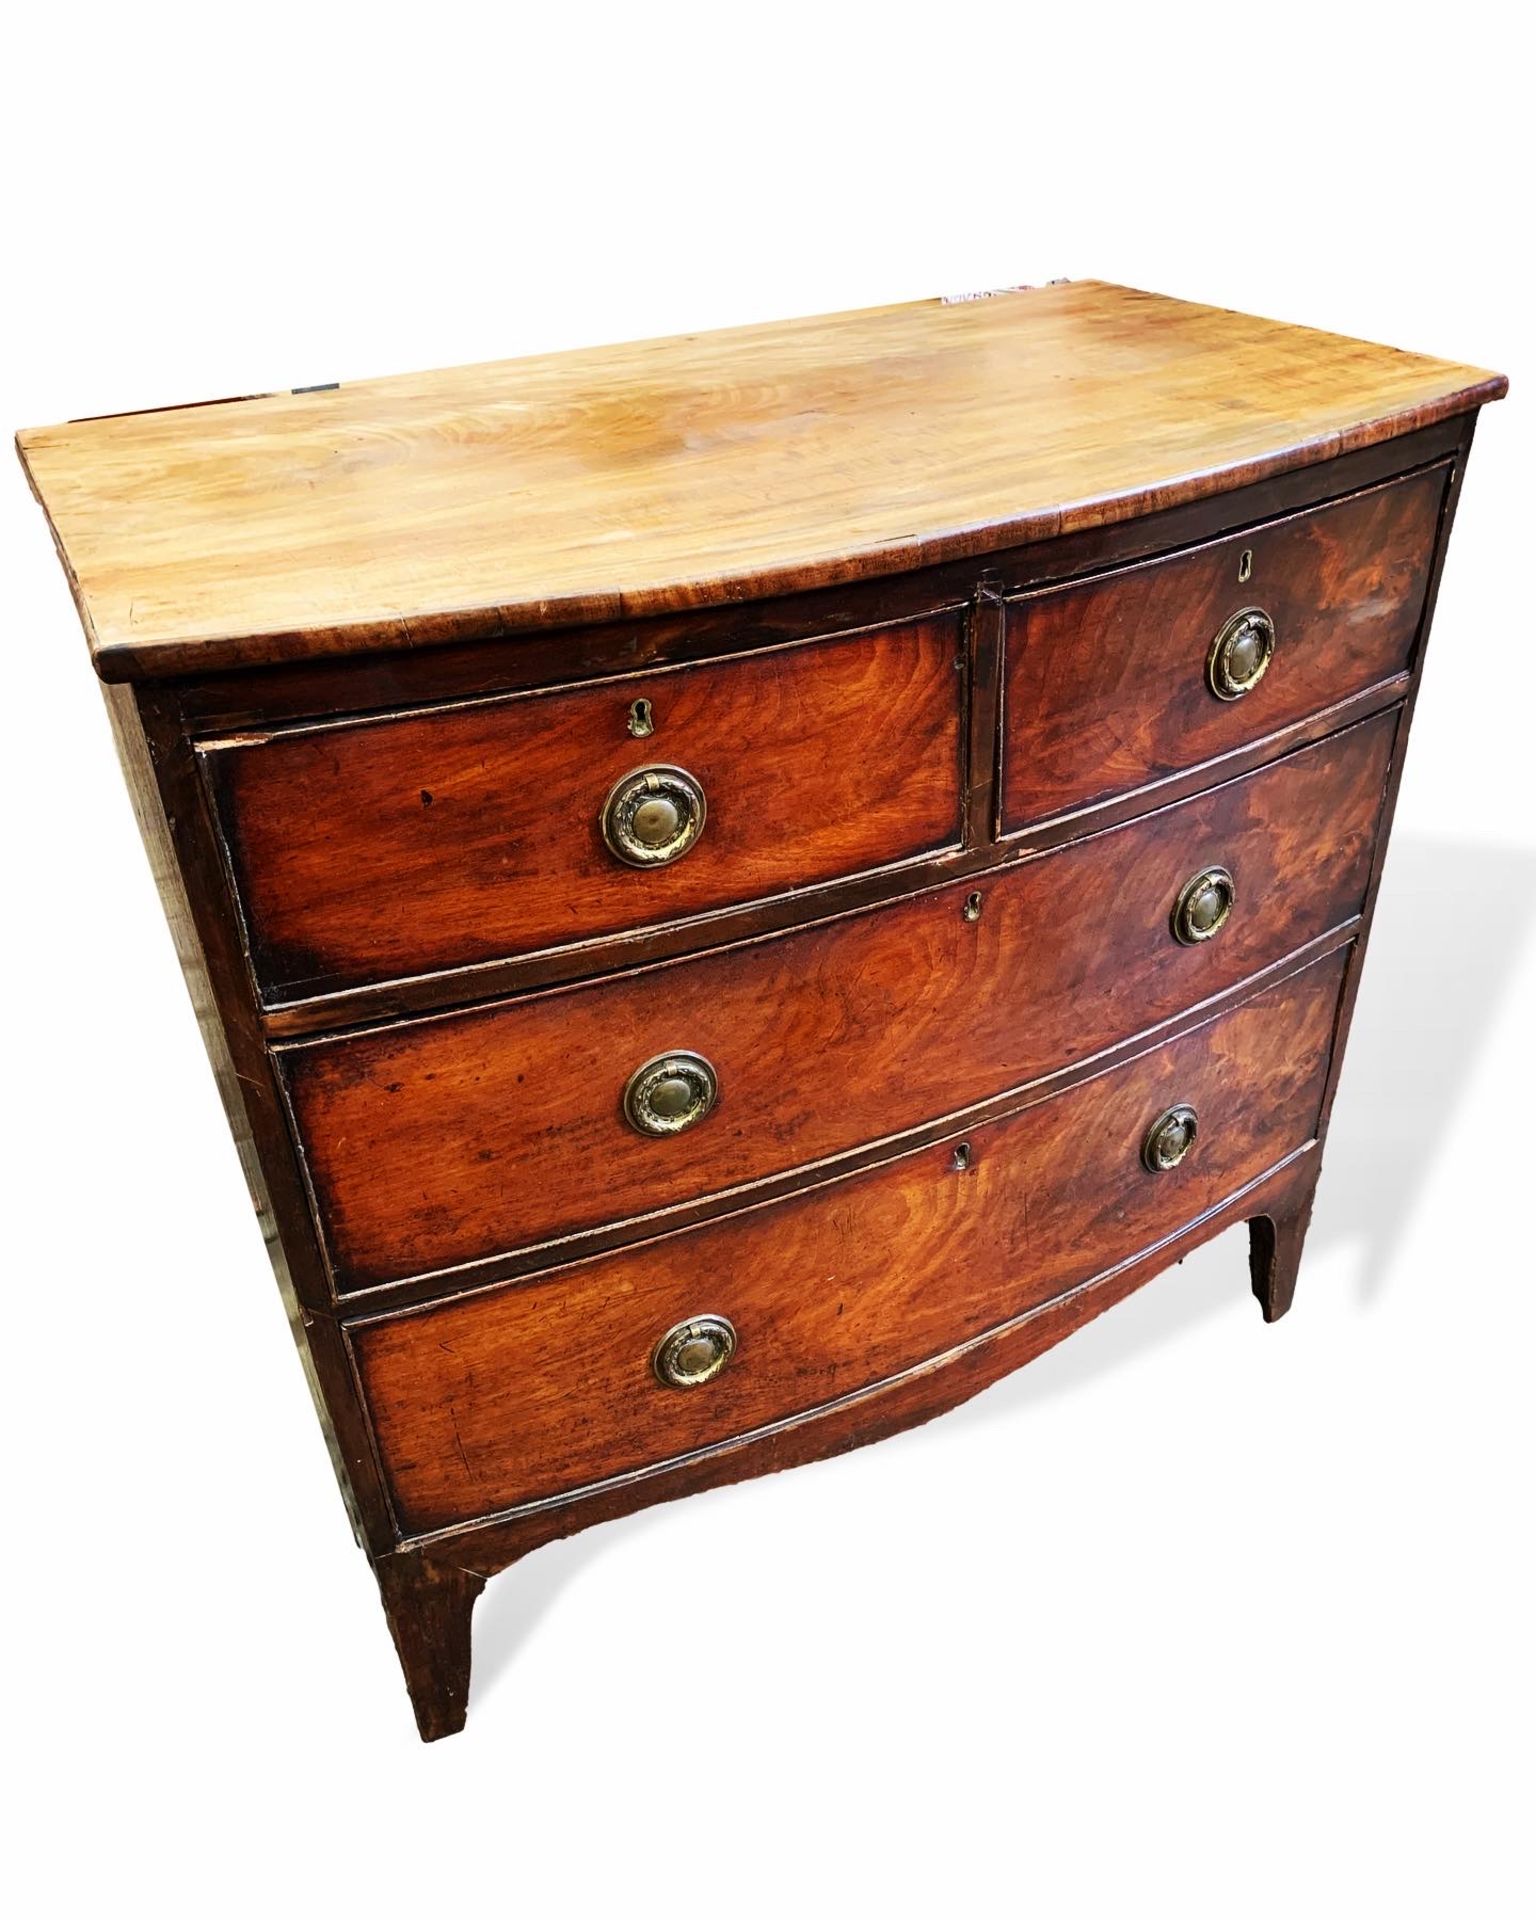 Victorian mahogany bow fronted chest of drawers - Image 2 of 4